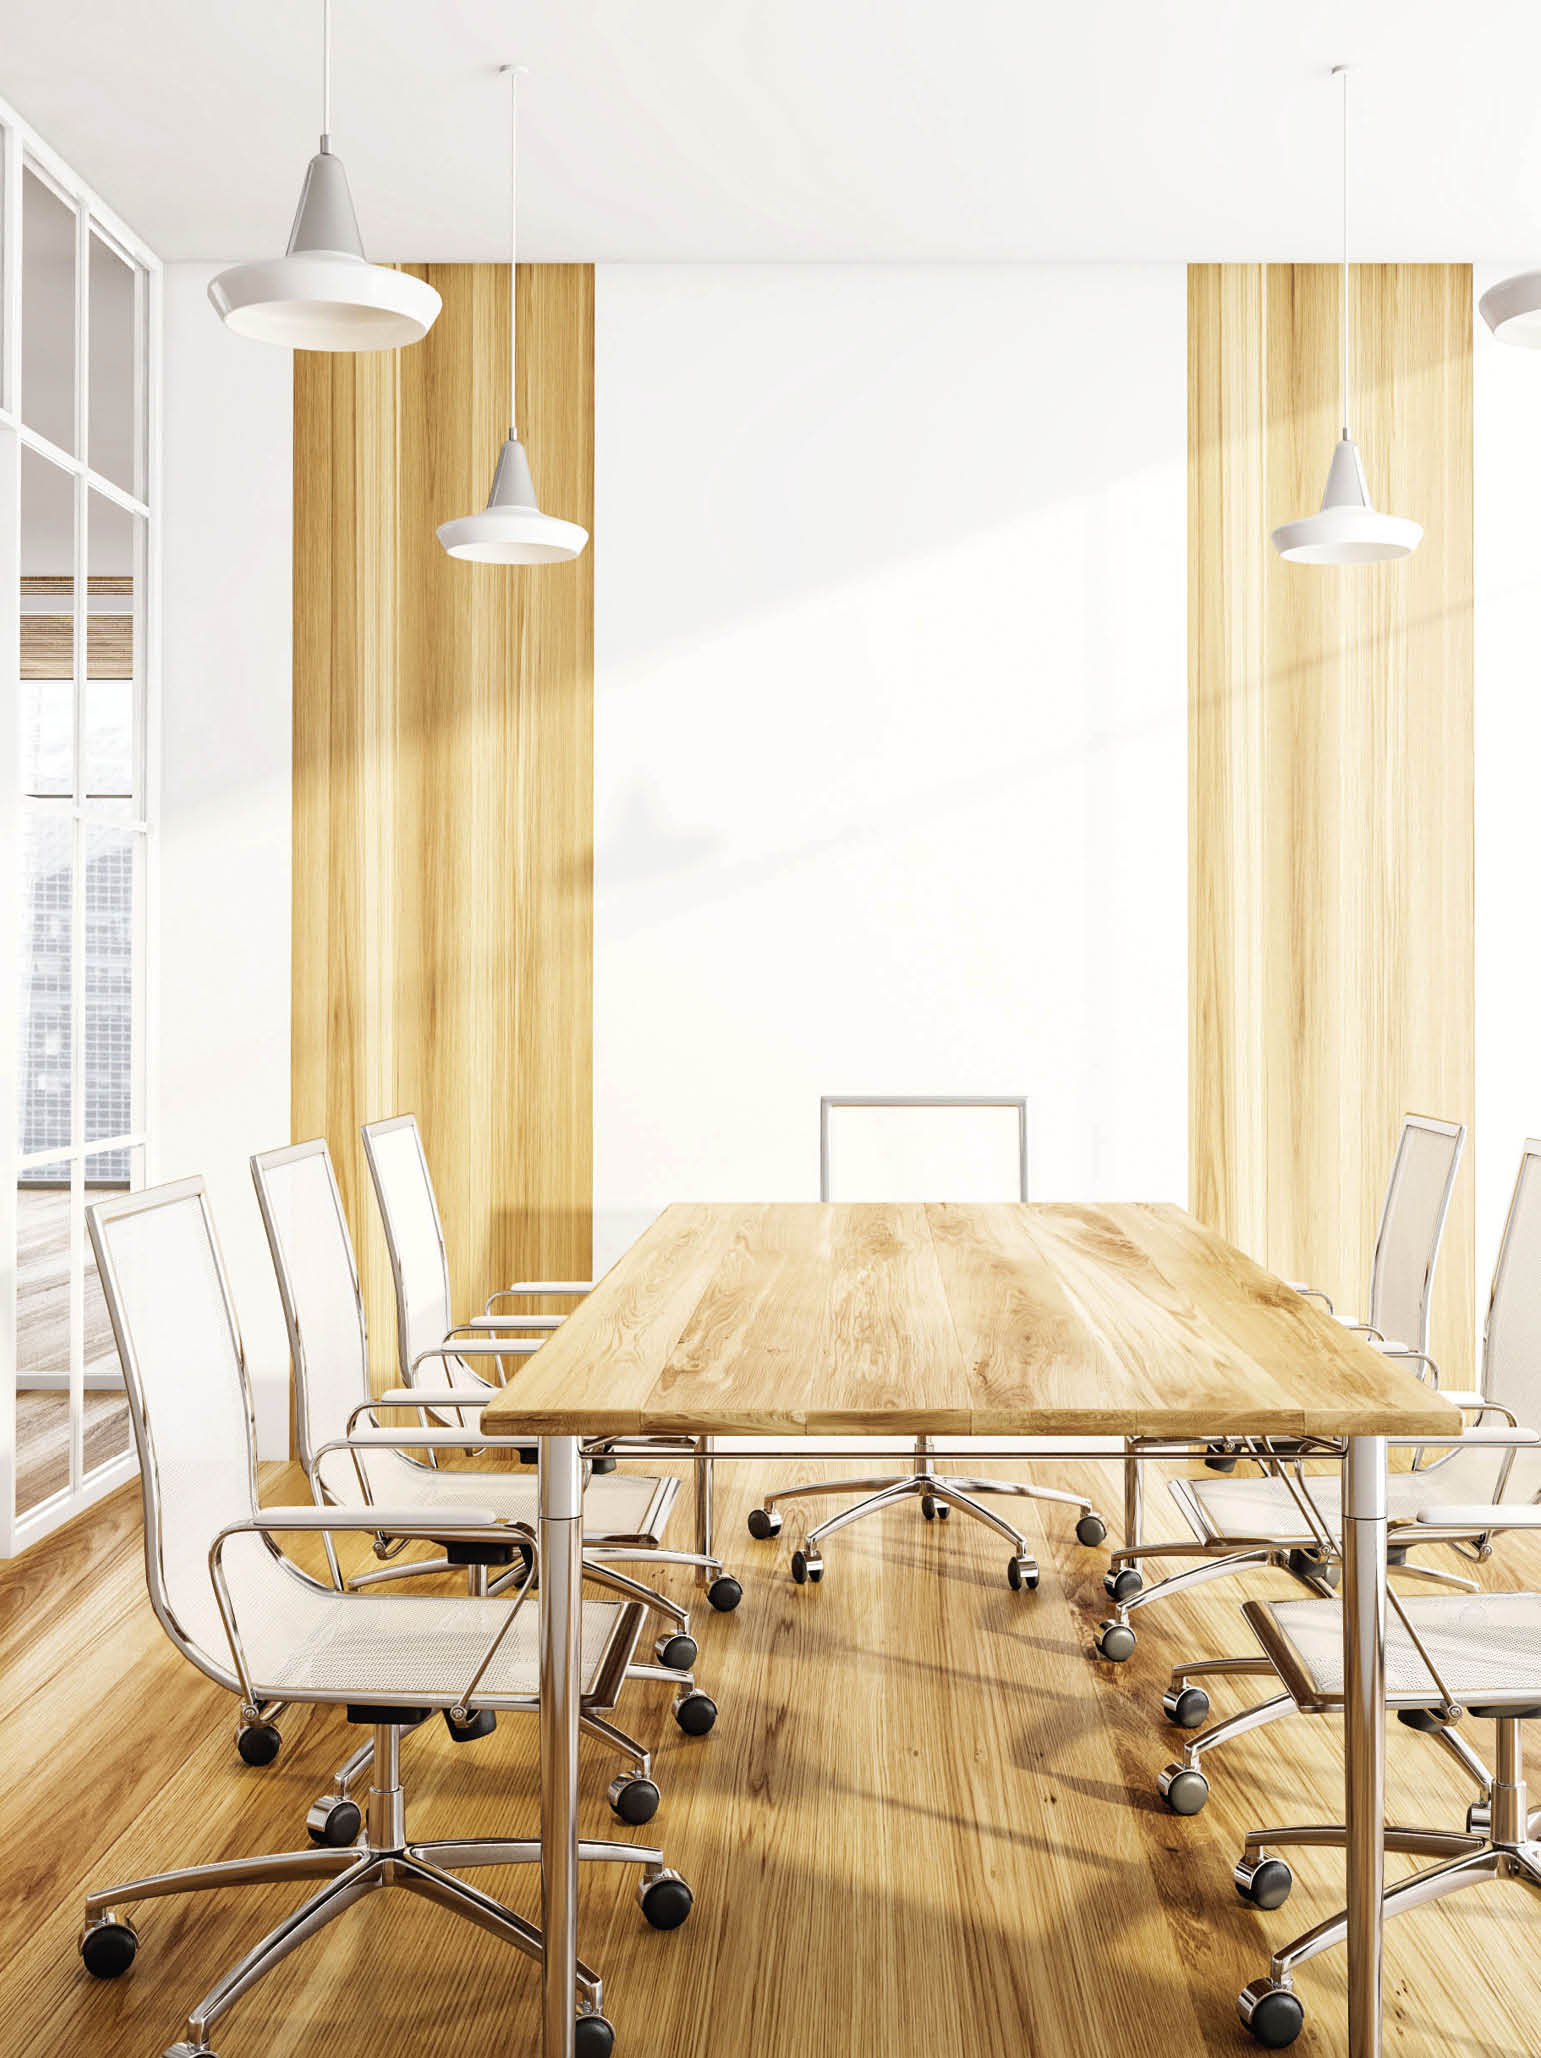 Wooden conference room with white armchairs and table  Office minimalist furniture, near window in business office, 3D rendering no people